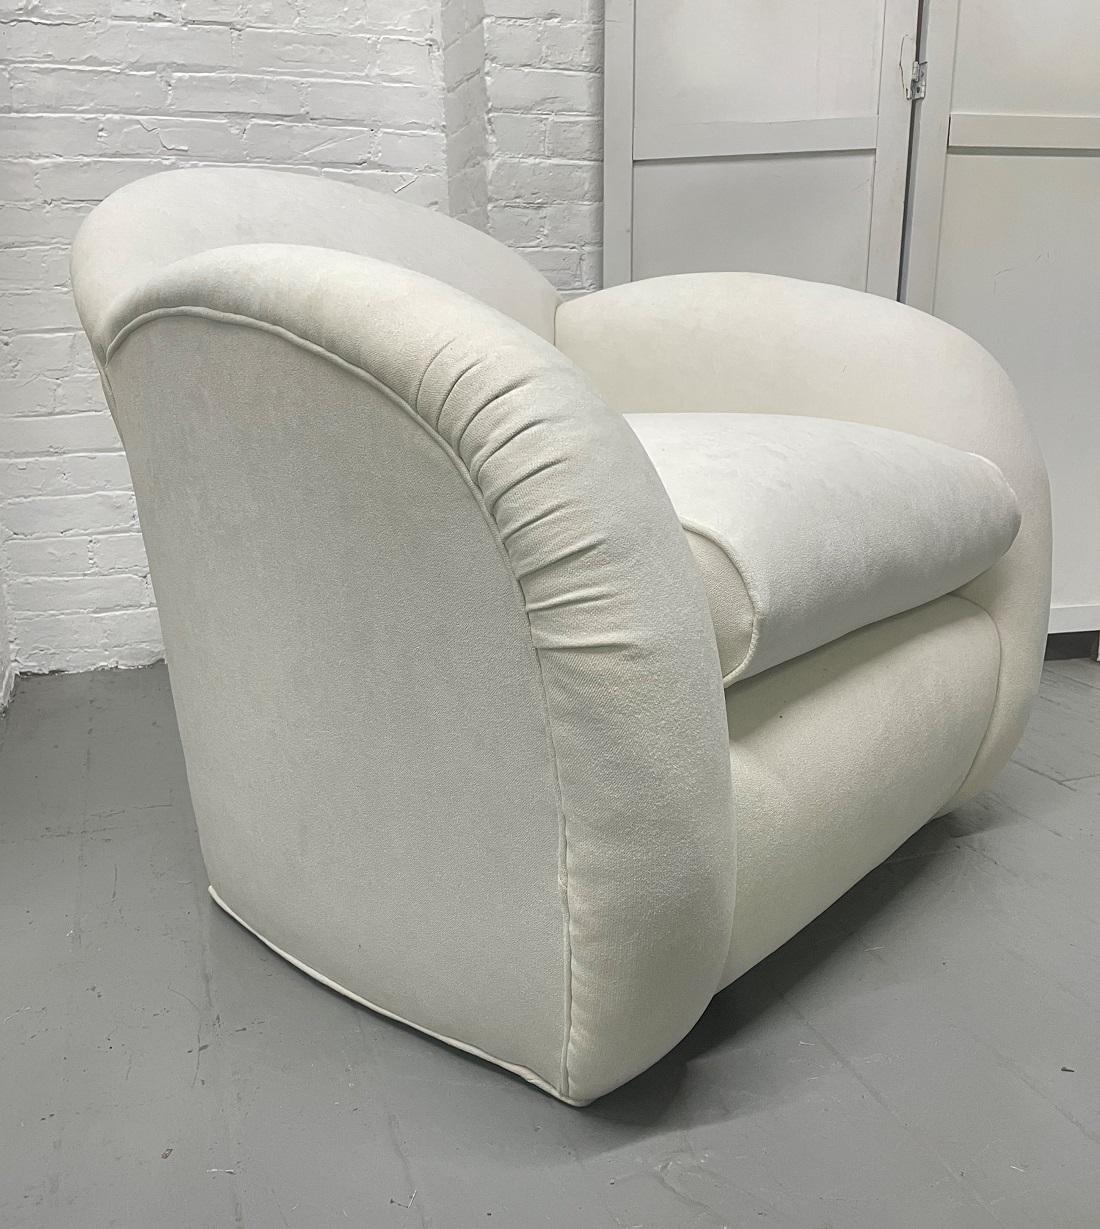 Pair Art Deco Lounge Chairs with Matching Ottoman For Sale 2